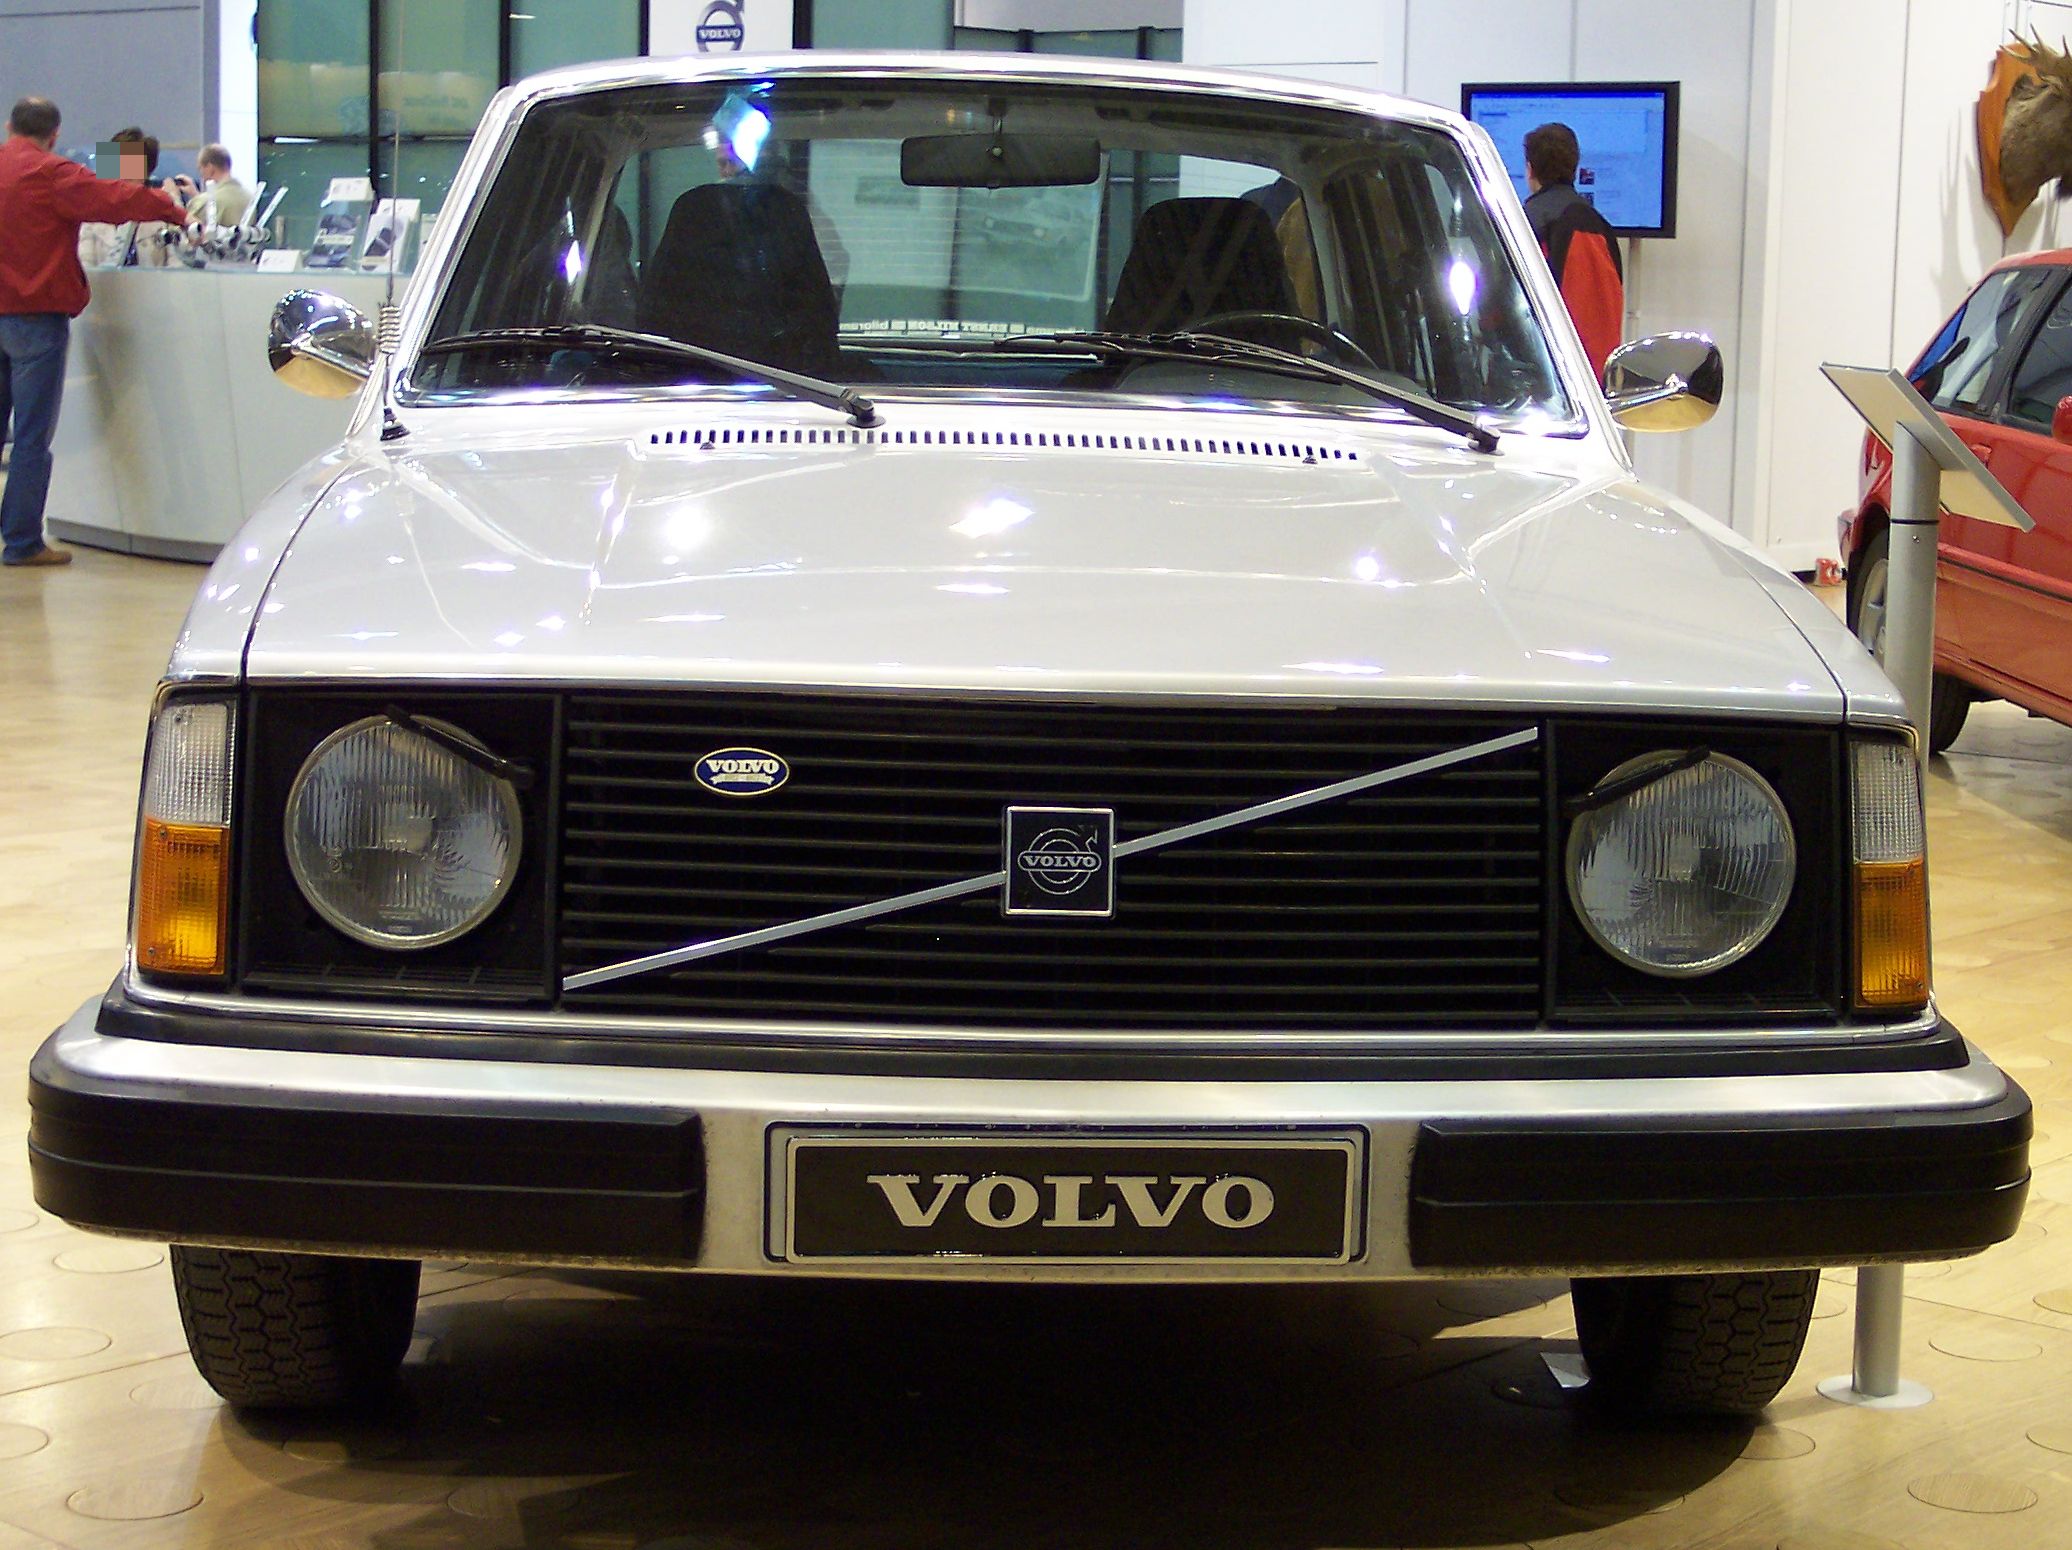 Volvo 244 anniversary edition. View Download Wallpaper. 2072x1550. Comments